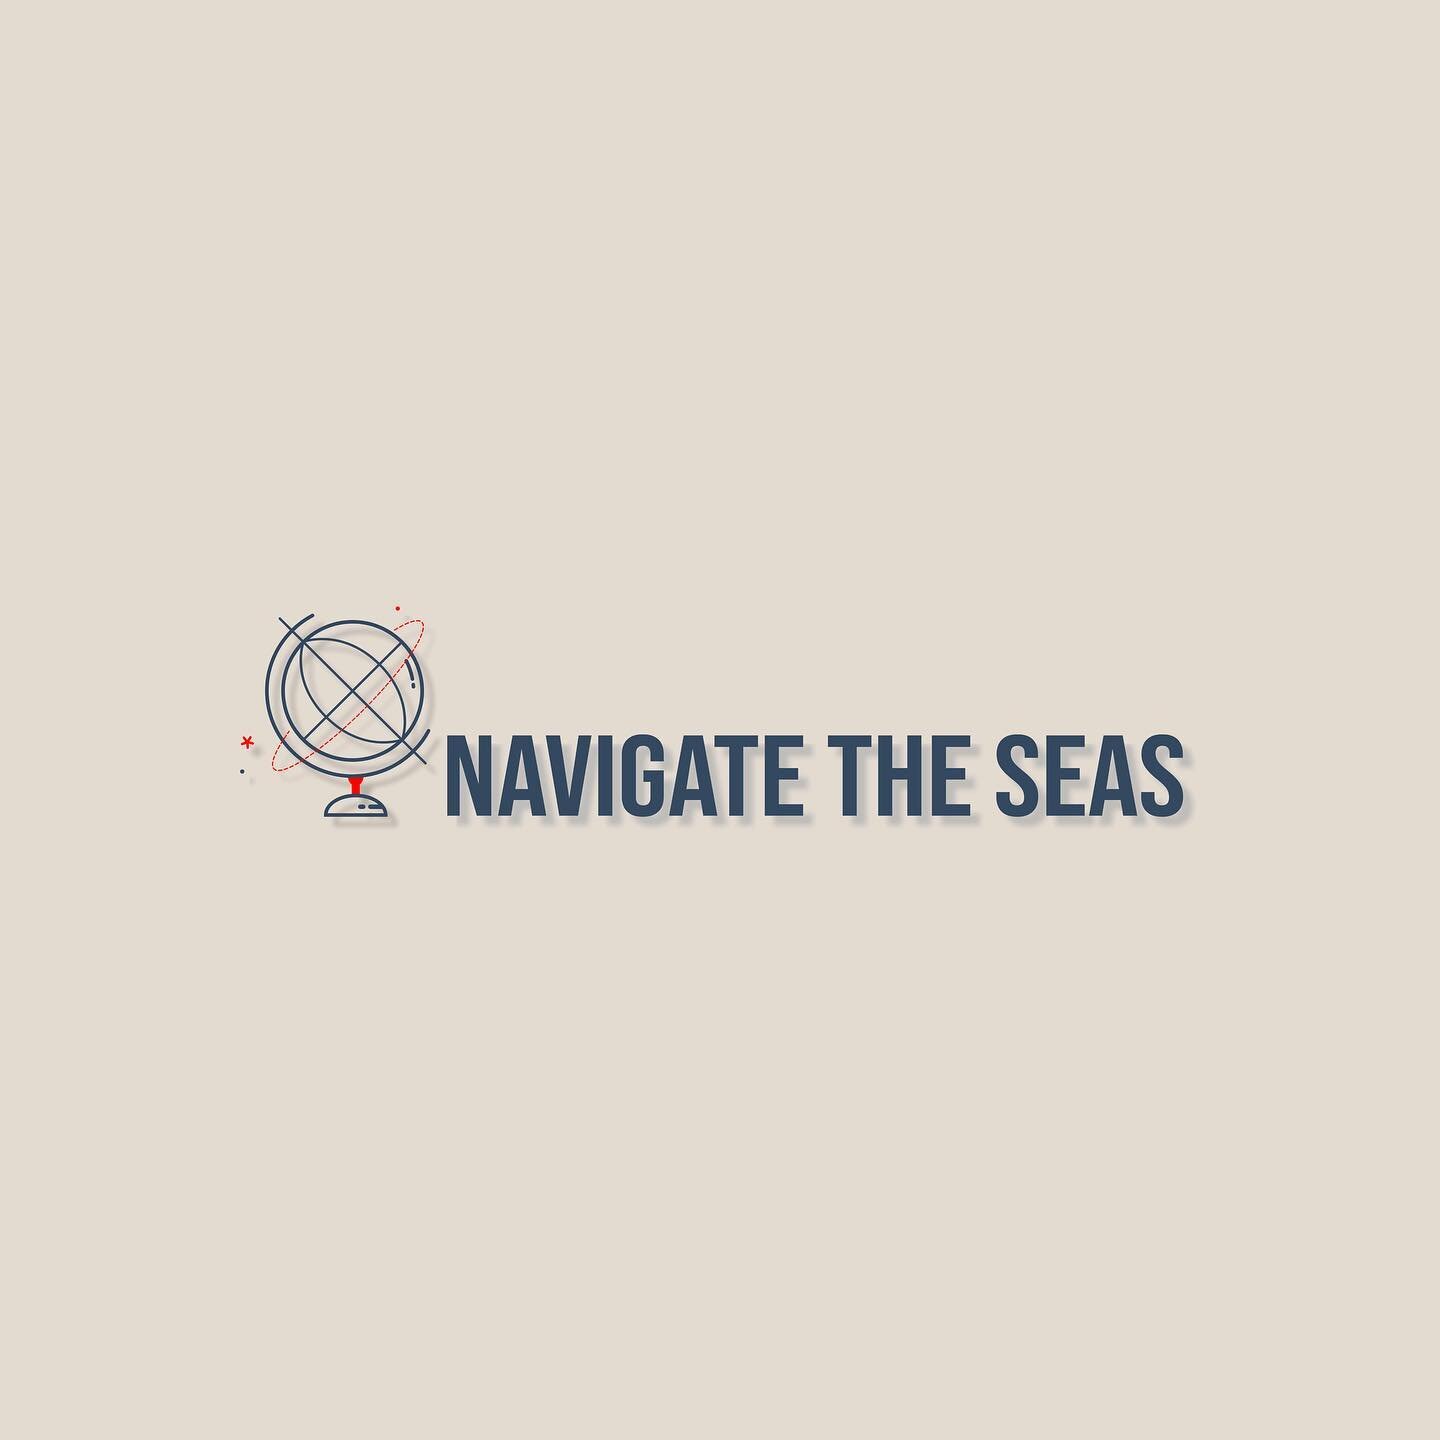 Check out our new website 🎉
To get involved get in touch! 

&bull;
&bull;
&bull;

#seaman #shipspotting #sailor #instaship #shiplife #lifeatsea #merchantmarine #sealife #instashipping #merchantnavy #sea #sailorlife #ship #seafarer #deckcadet #lifeon